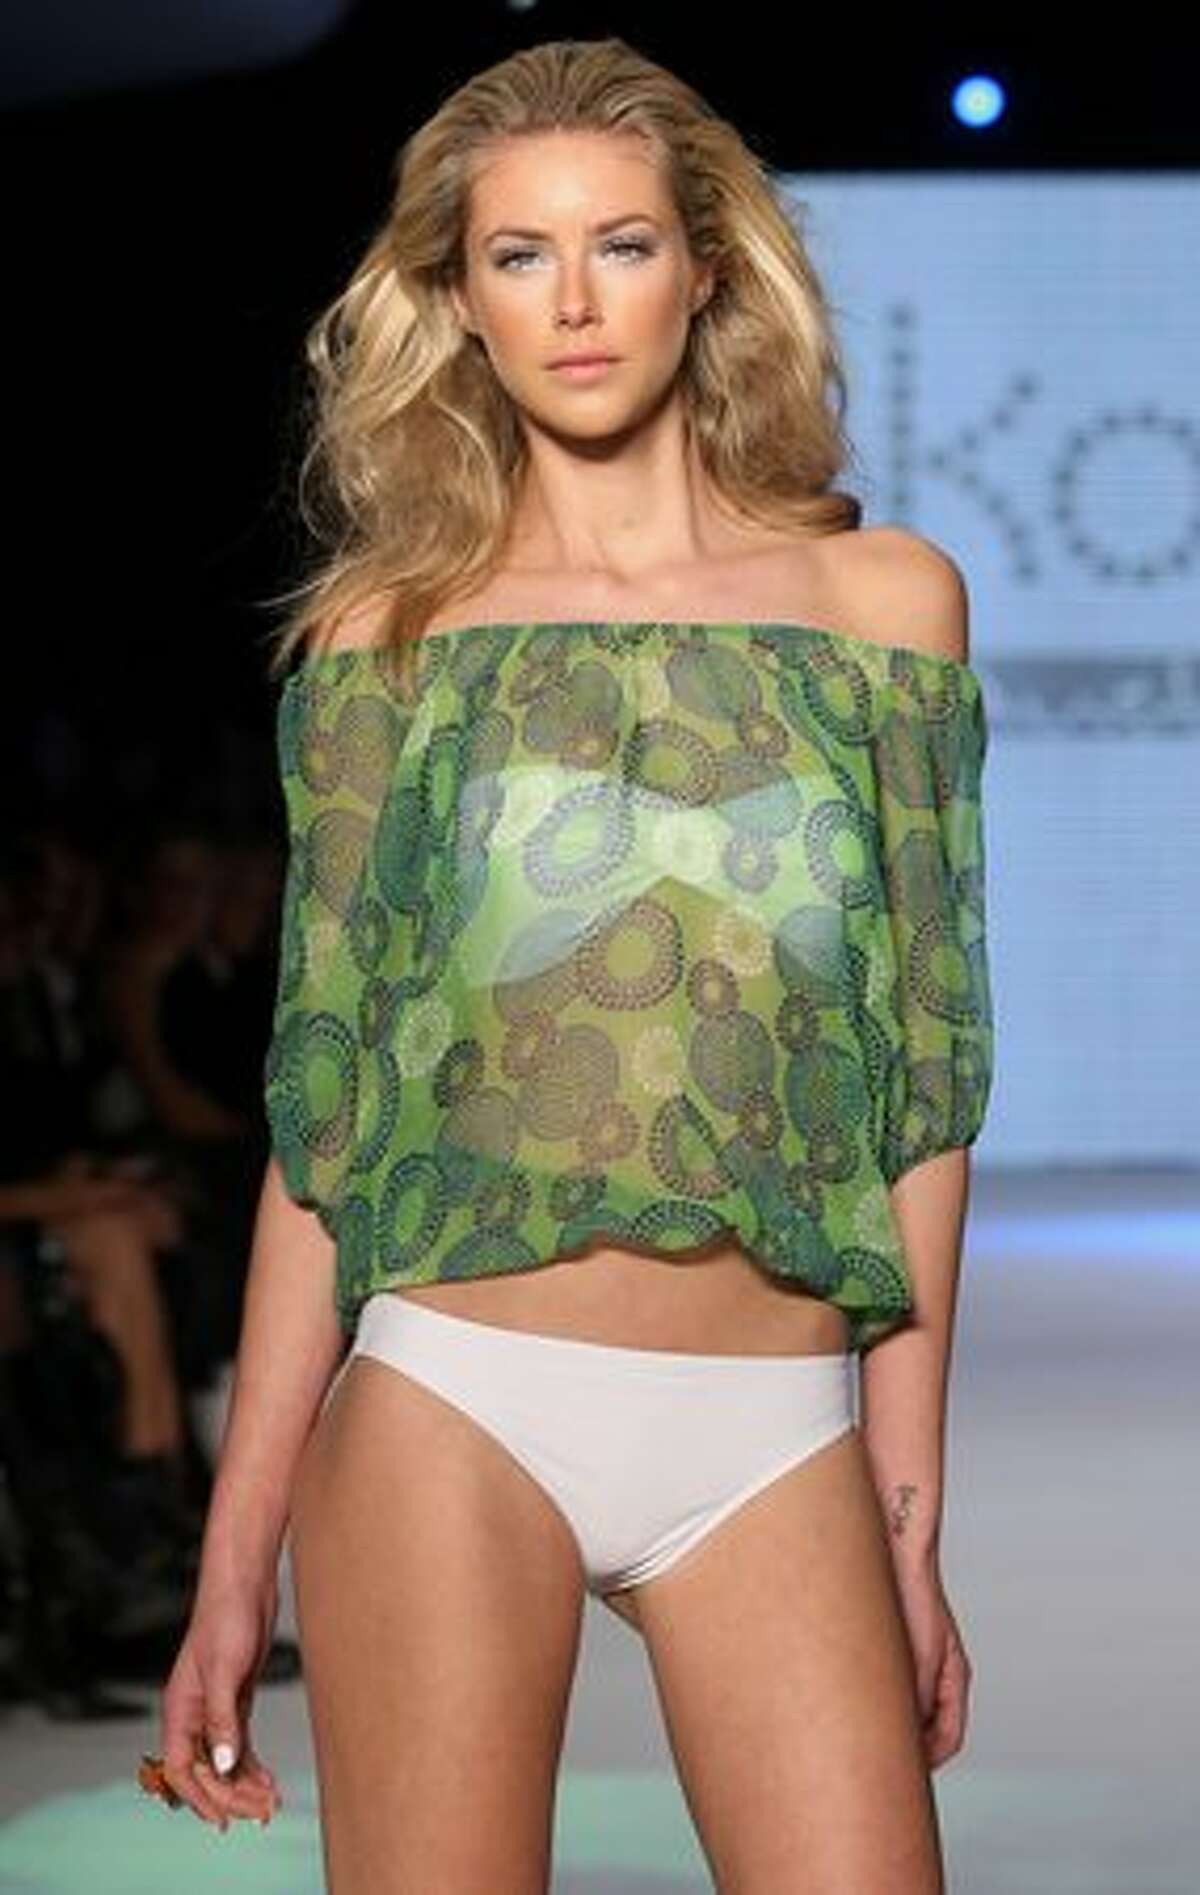 A model showcases designs on the catwalk during the Kooey collection show on the fourth day of Rosemount Australian Fashion Week Spring/Summer 2010/11 in Sydney, Australia.